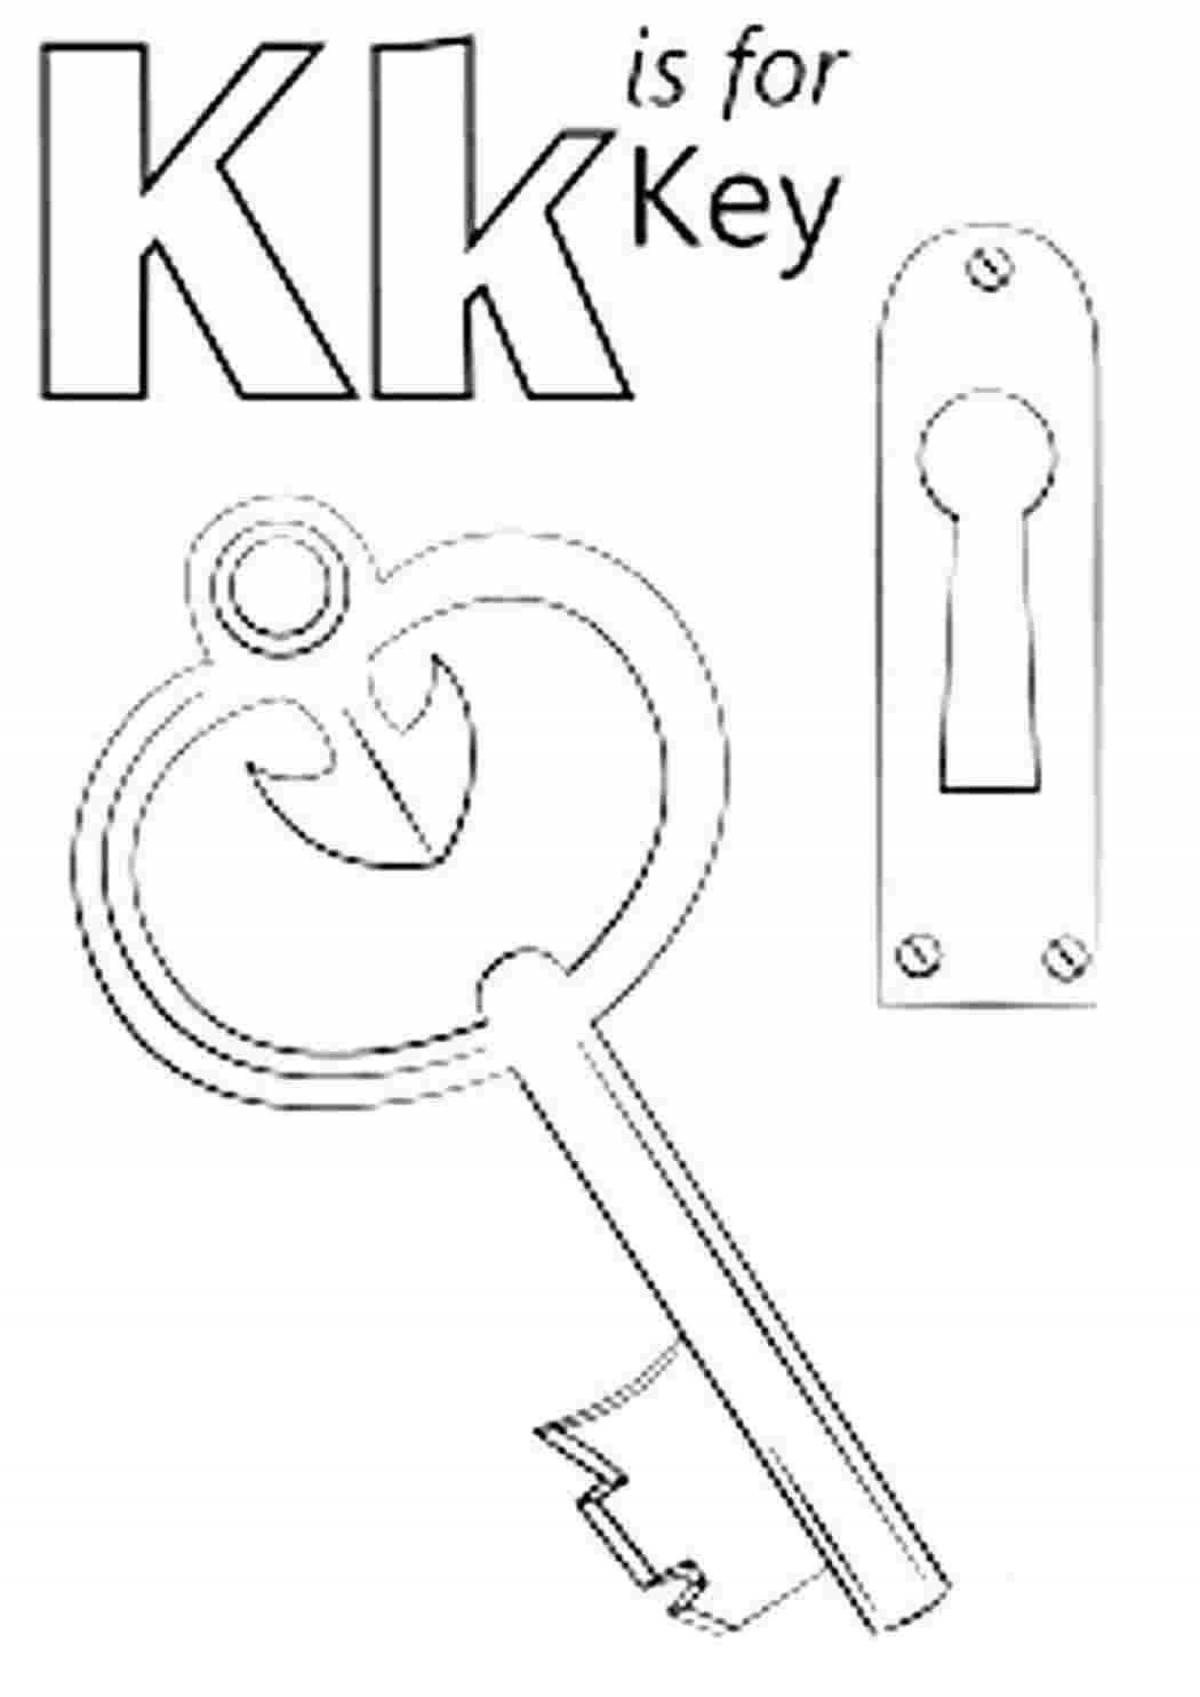 Innovative License Key Plus coloring page